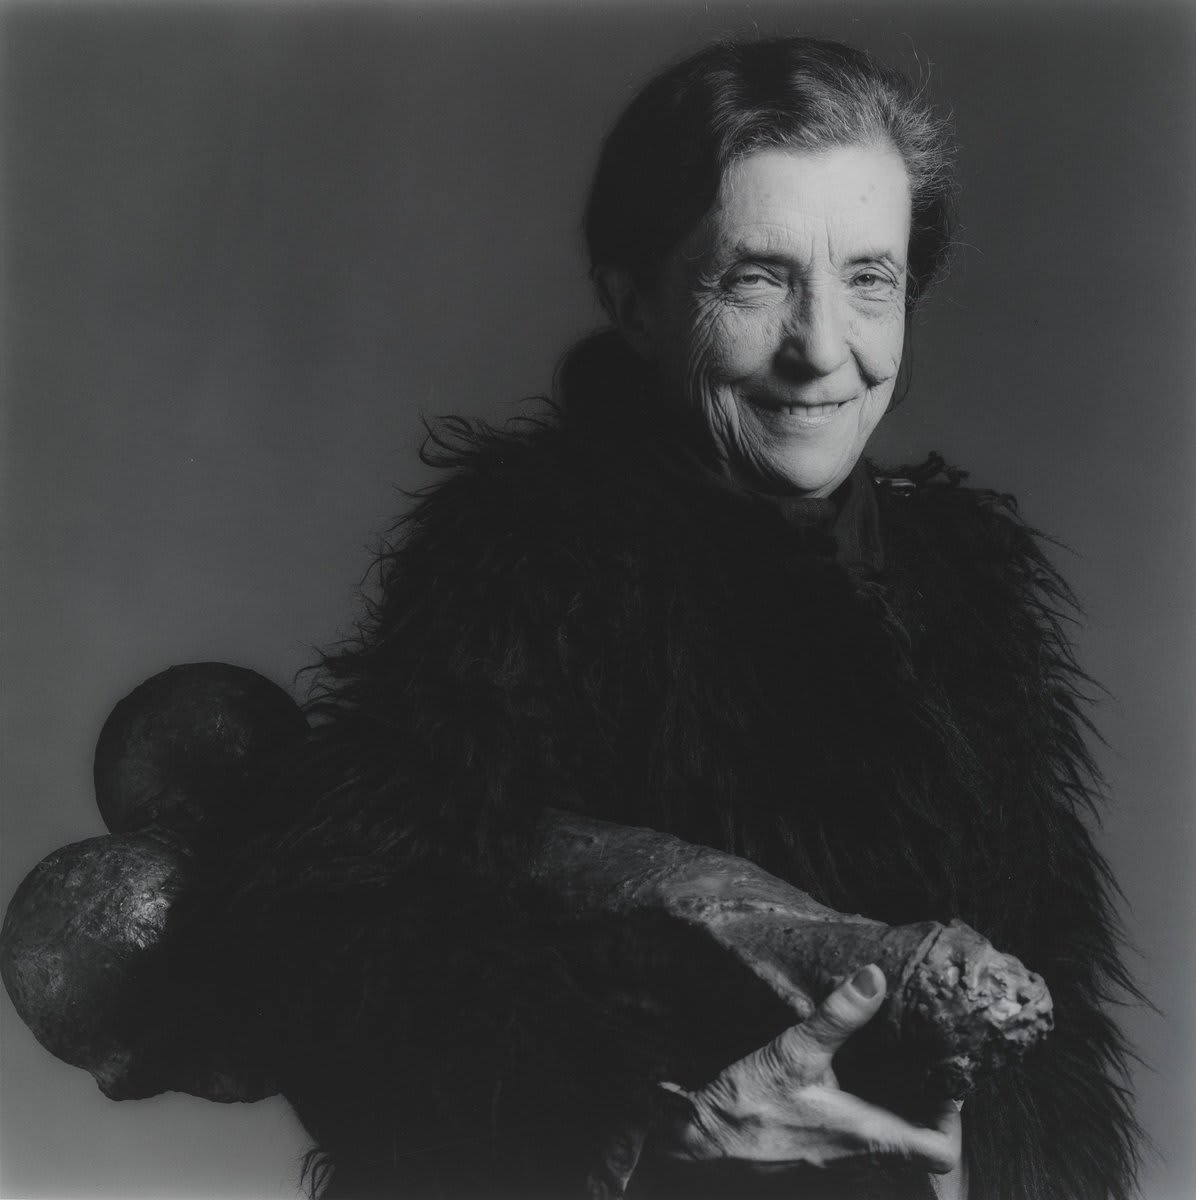 MapplethorpeMondays—for Louise Bourgeois’s retrospective at the @museumofmodernart in 1982-83, the museum commissioned Robert Mapplethorpe to create a portrait of the artist for the exhibition’s catalogue. Learn more about the portrait: